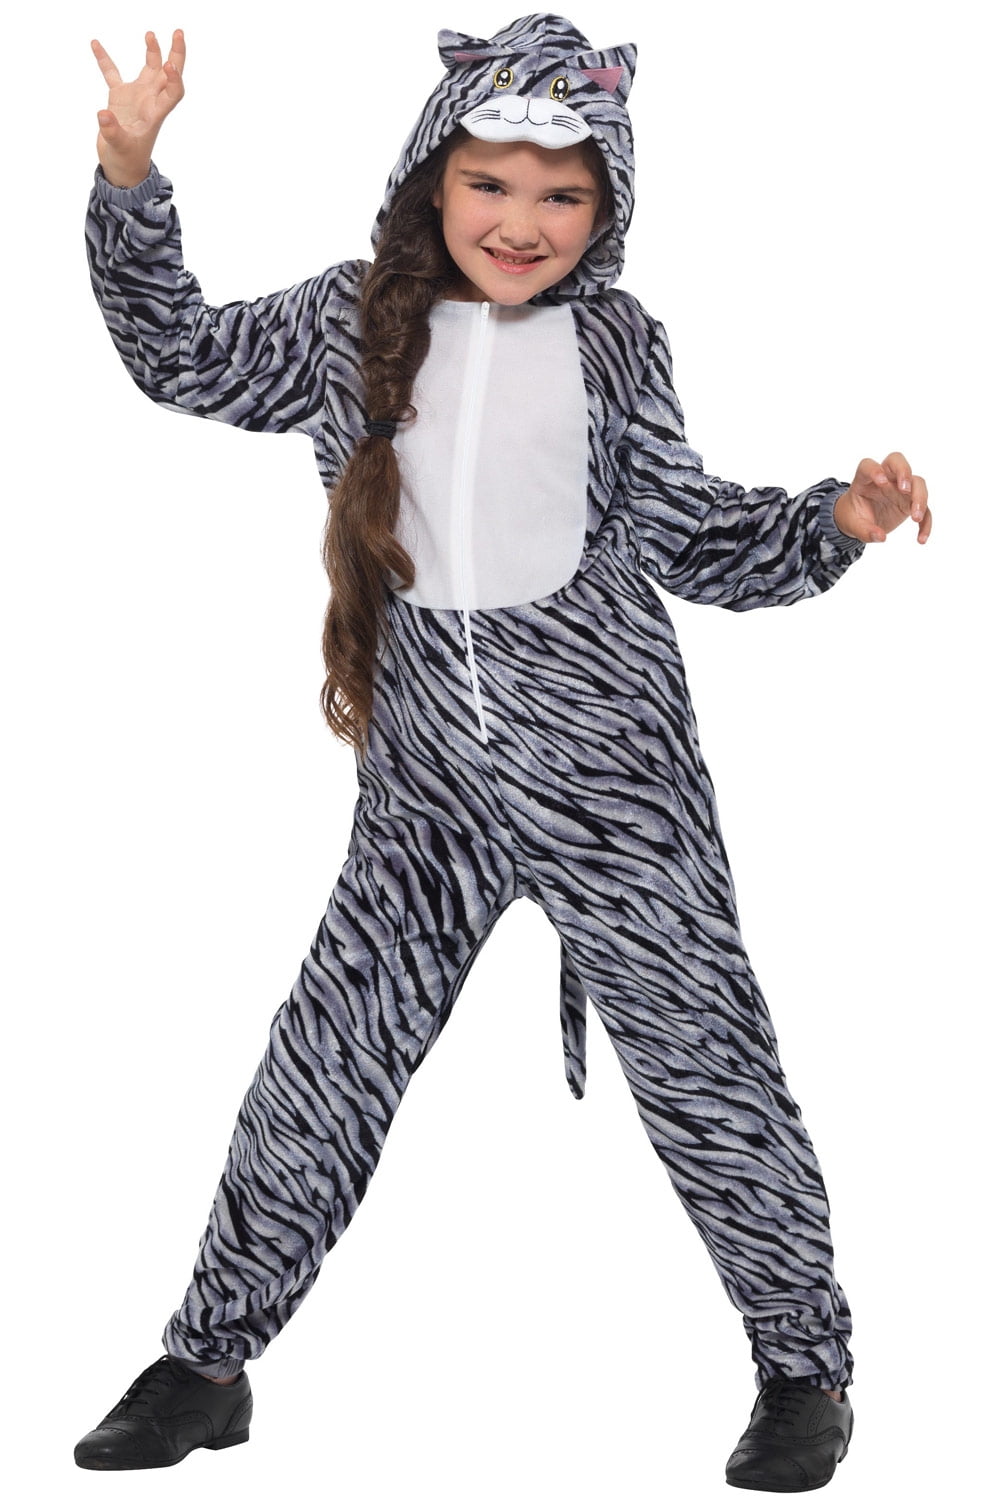 Childs Deluxe Tabby Cat Fancy Dress Costume Girls Boys Unisex Outfit by Smiffys 